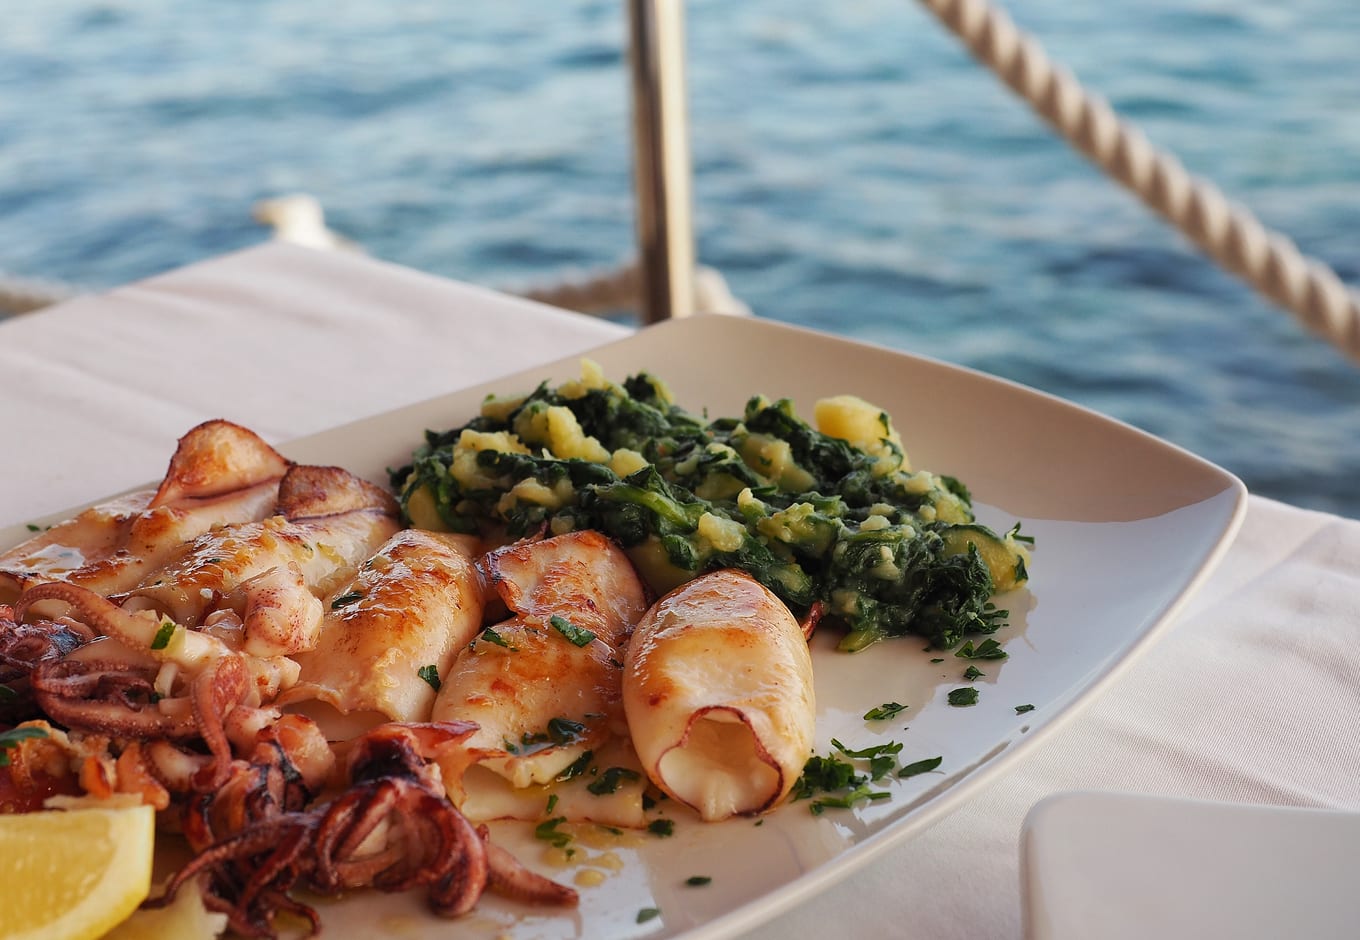 A plate with blitva and grilled squid, a traditional Croatian dish.